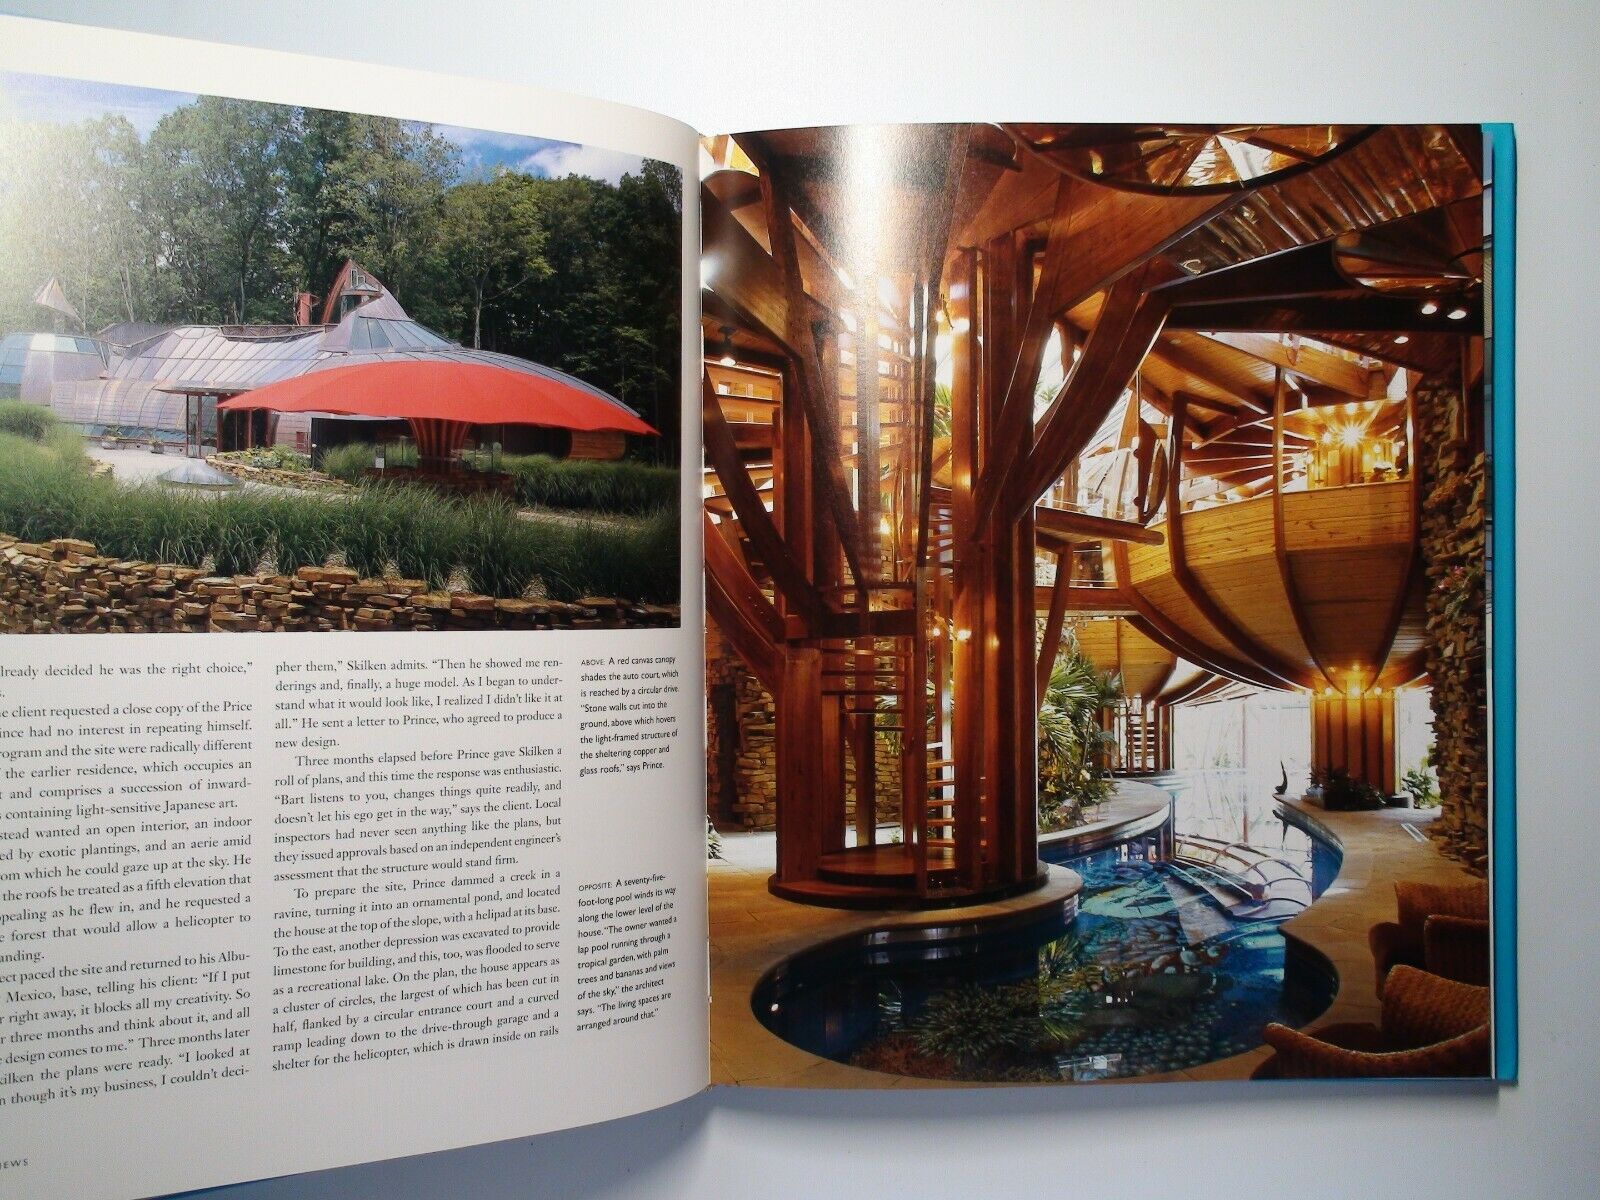 Private Views Inside the World's Greatest Homes, Architectural Digest, 2007